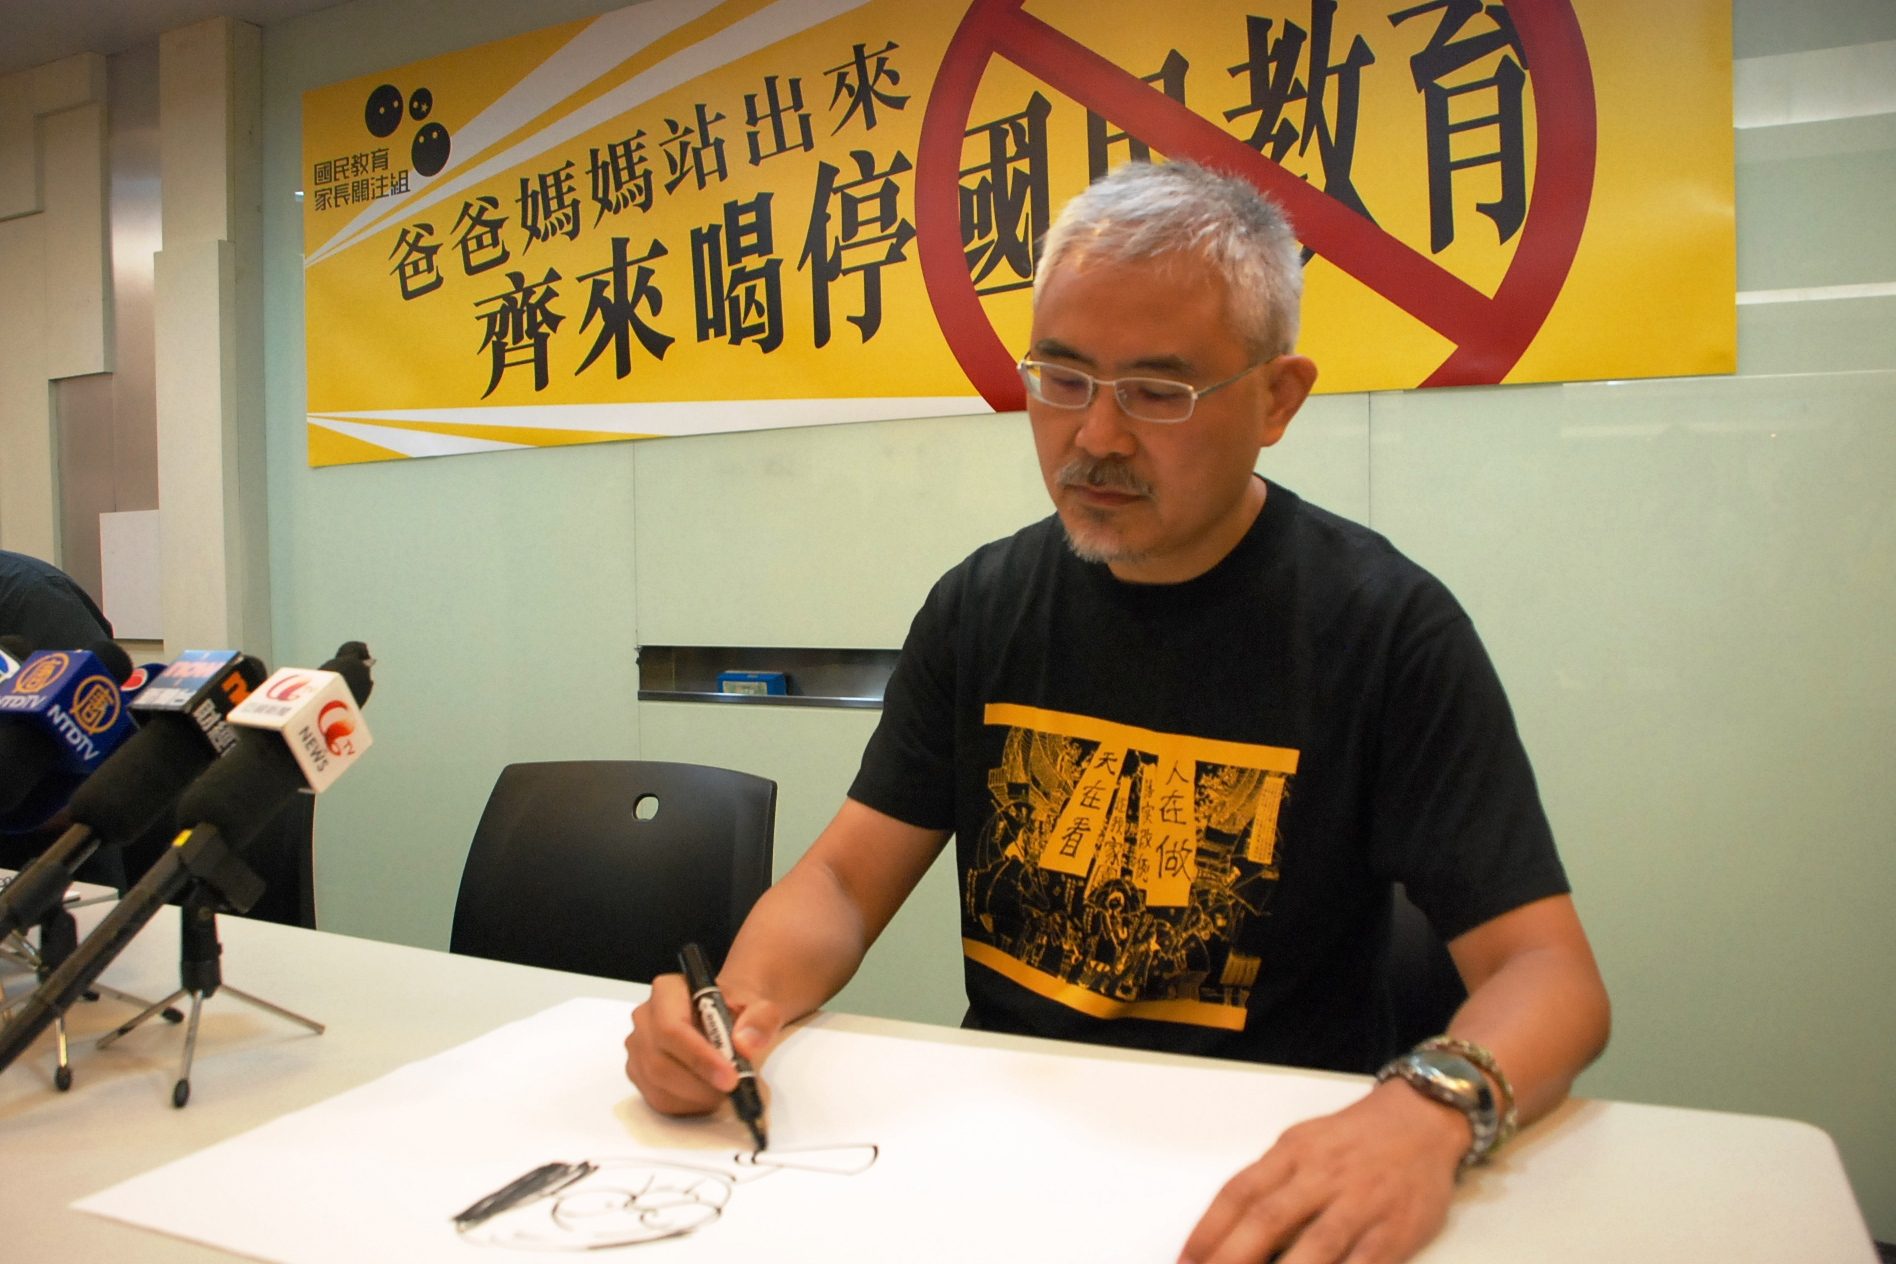 Hong Kong political cartoon axed after government pressure, cartoonist says